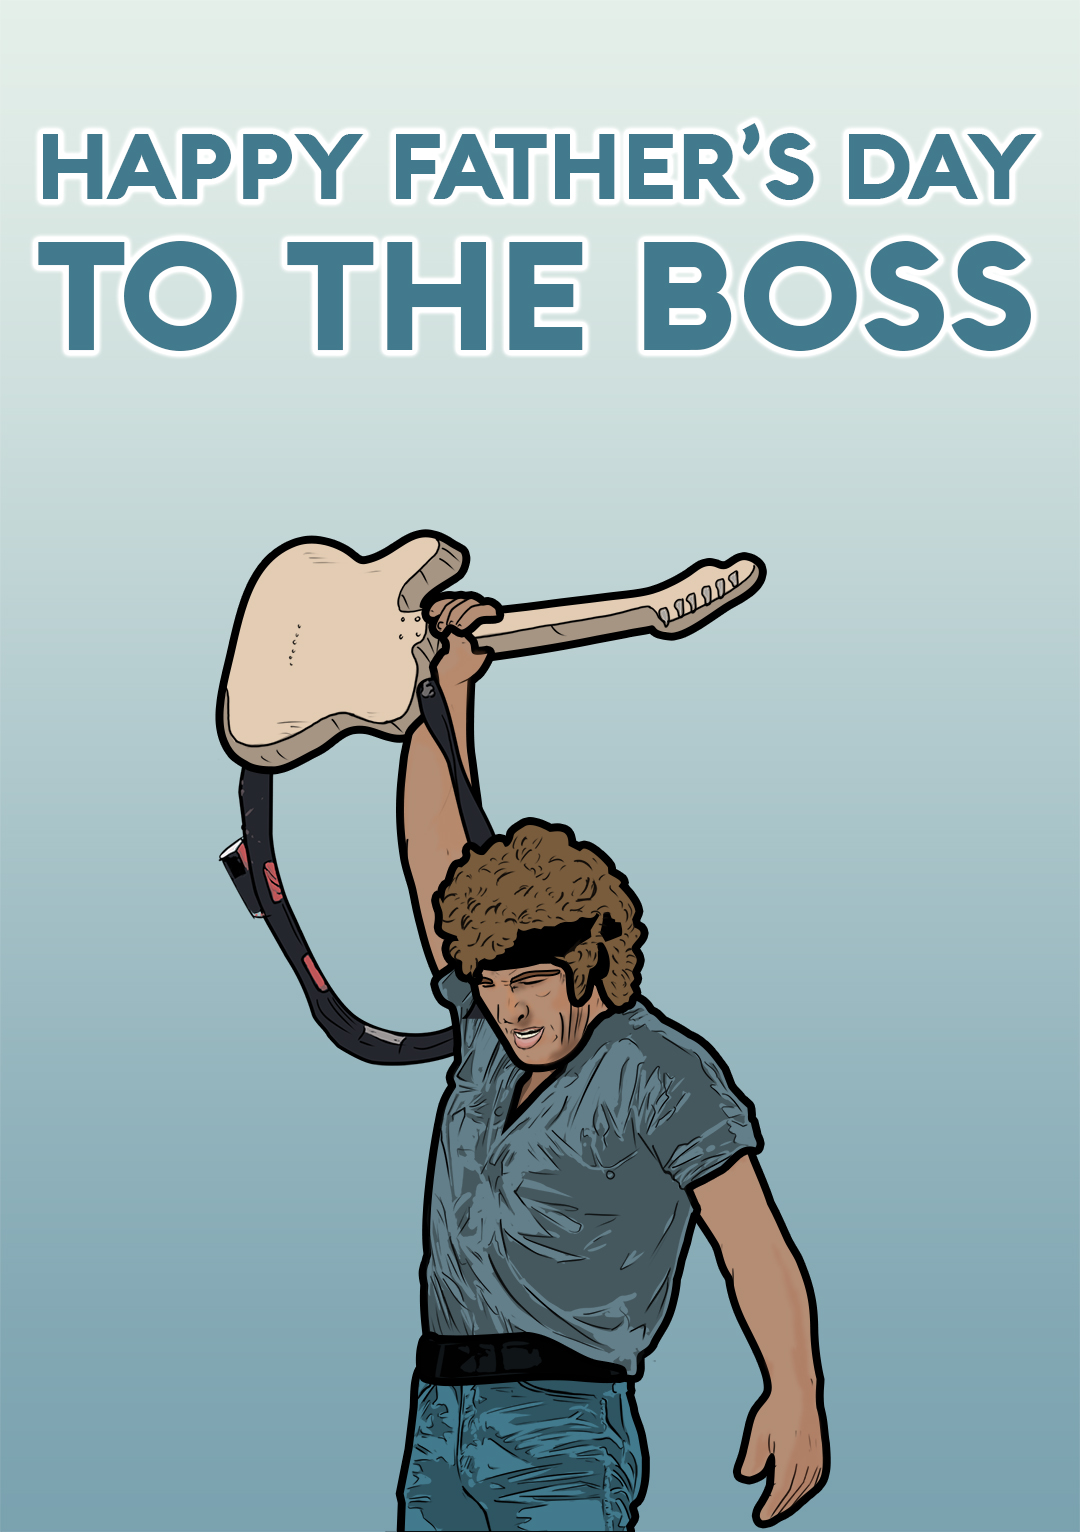 Happy Father's Day To The Boss - Bruce Springsteen Inspired Card